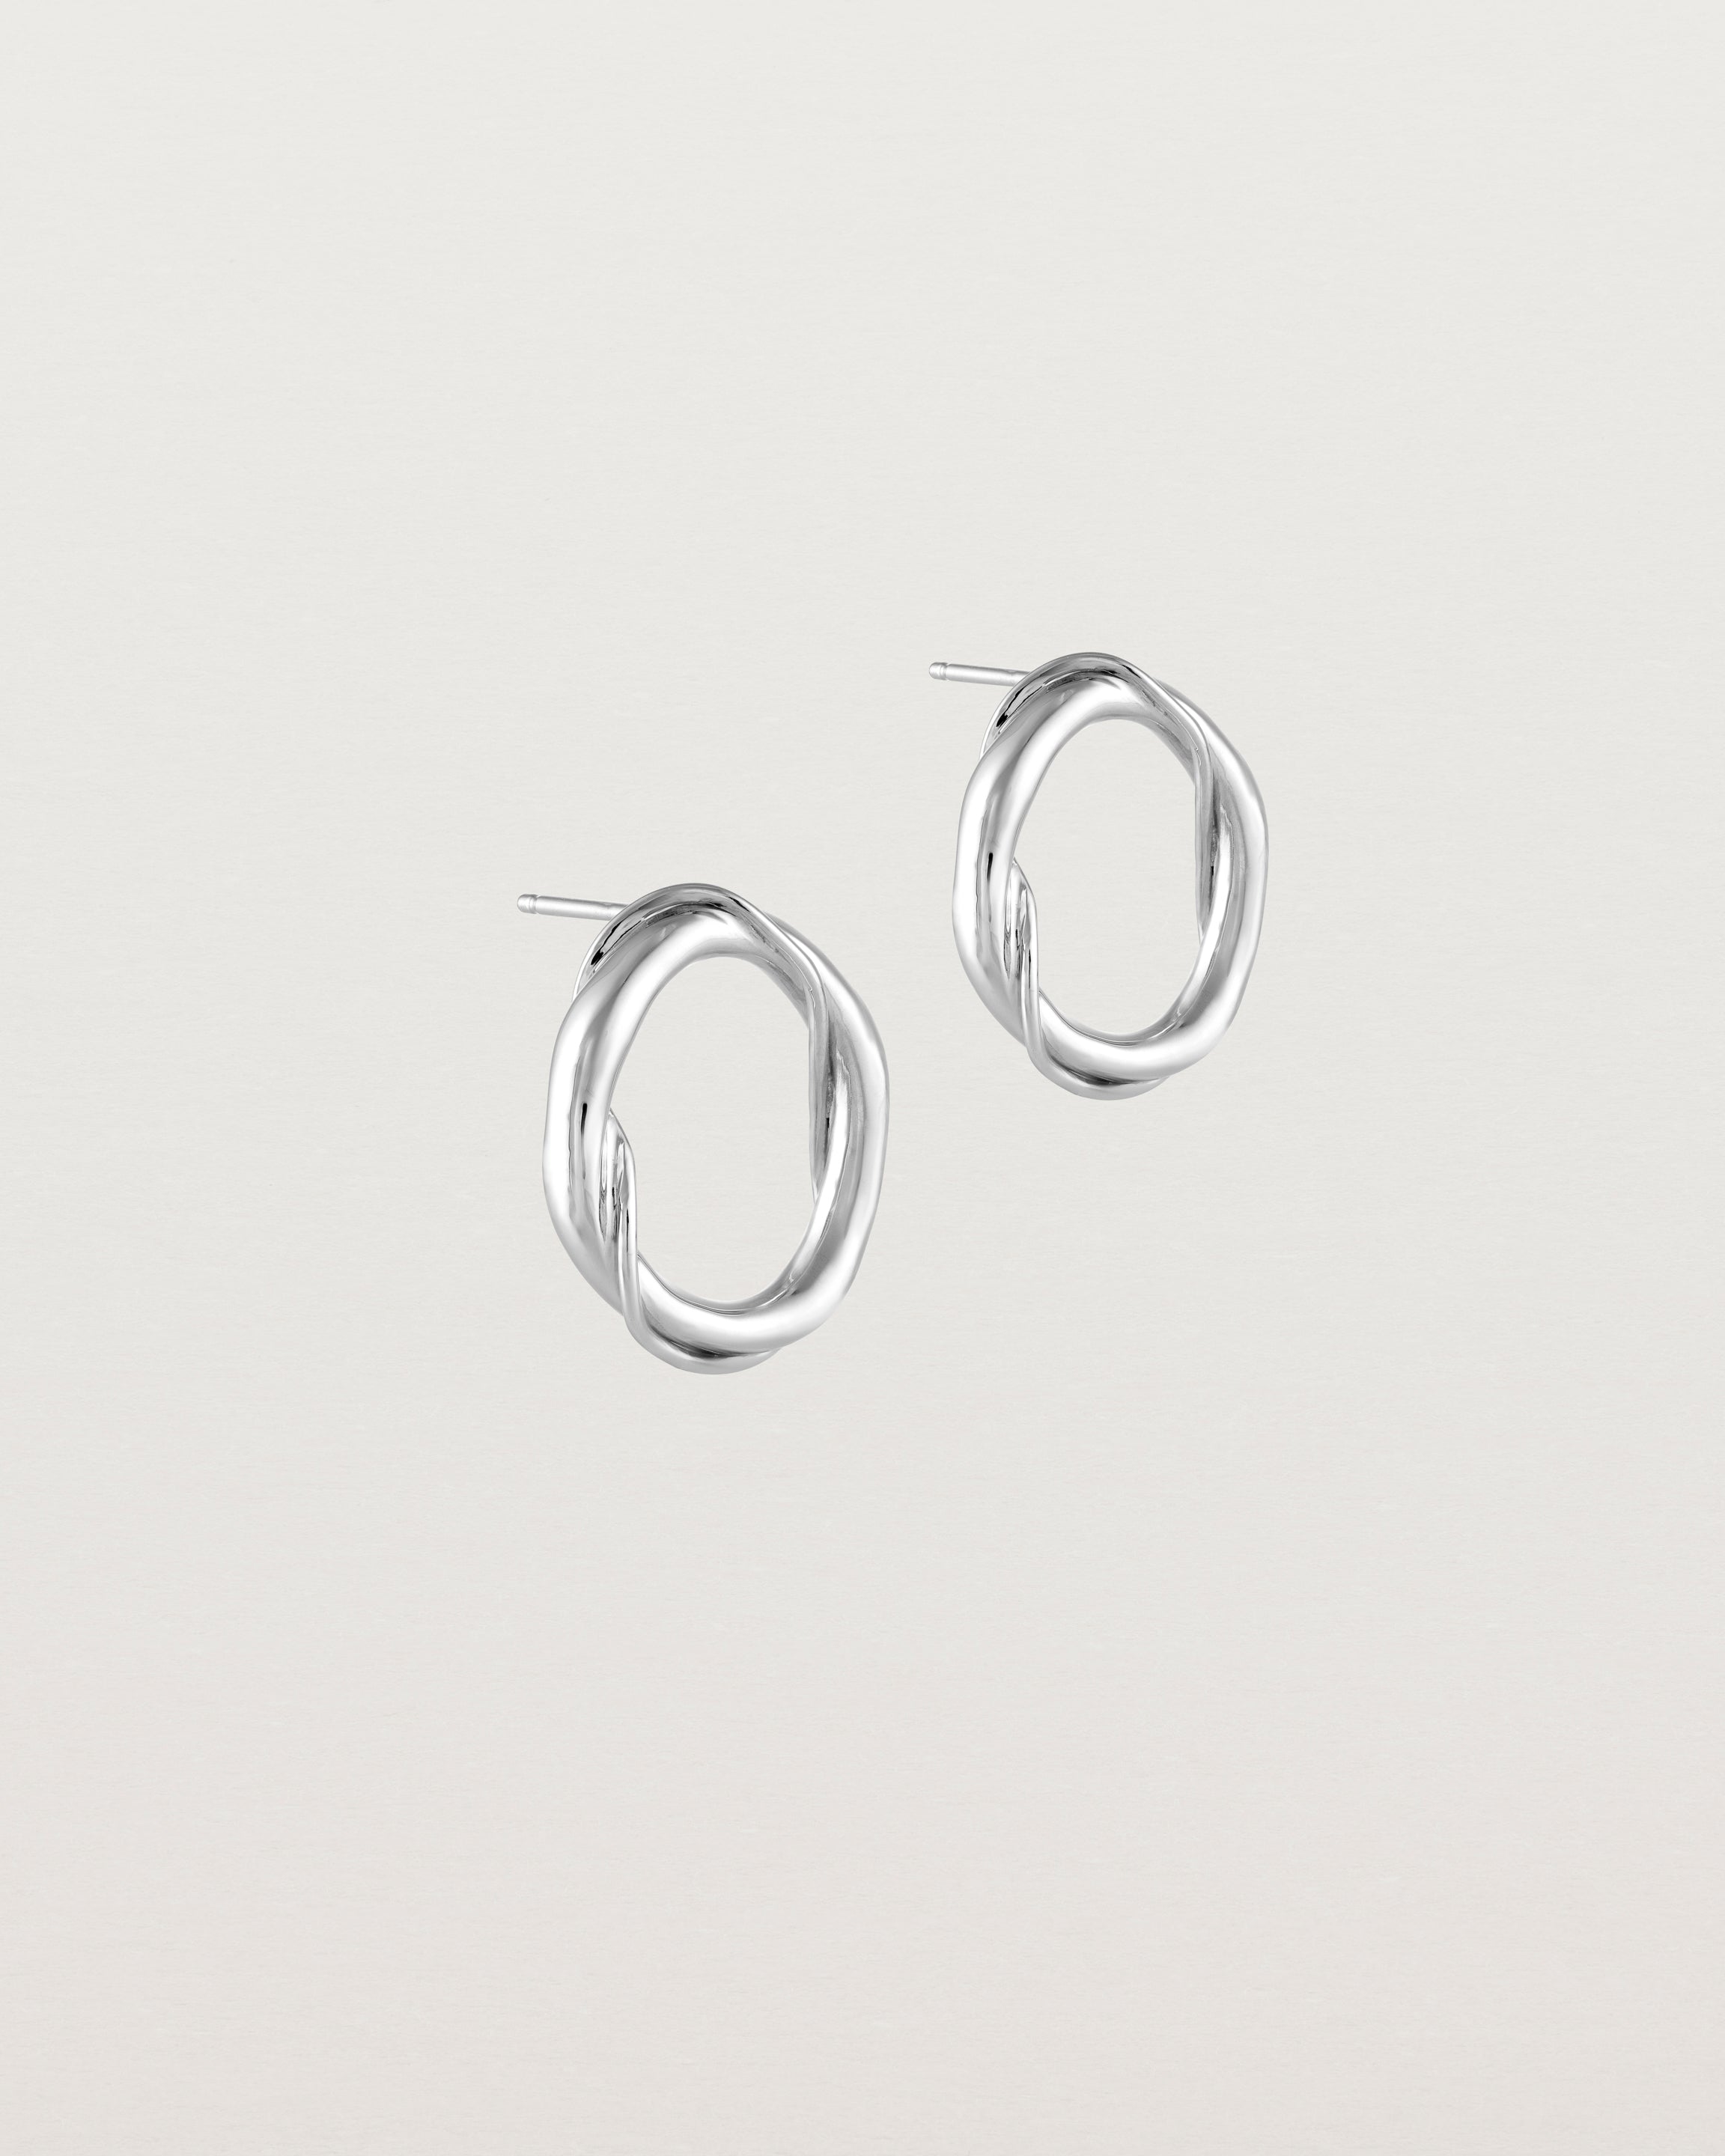 Angled view of the Petite Dalí Earrings in sterling silver.